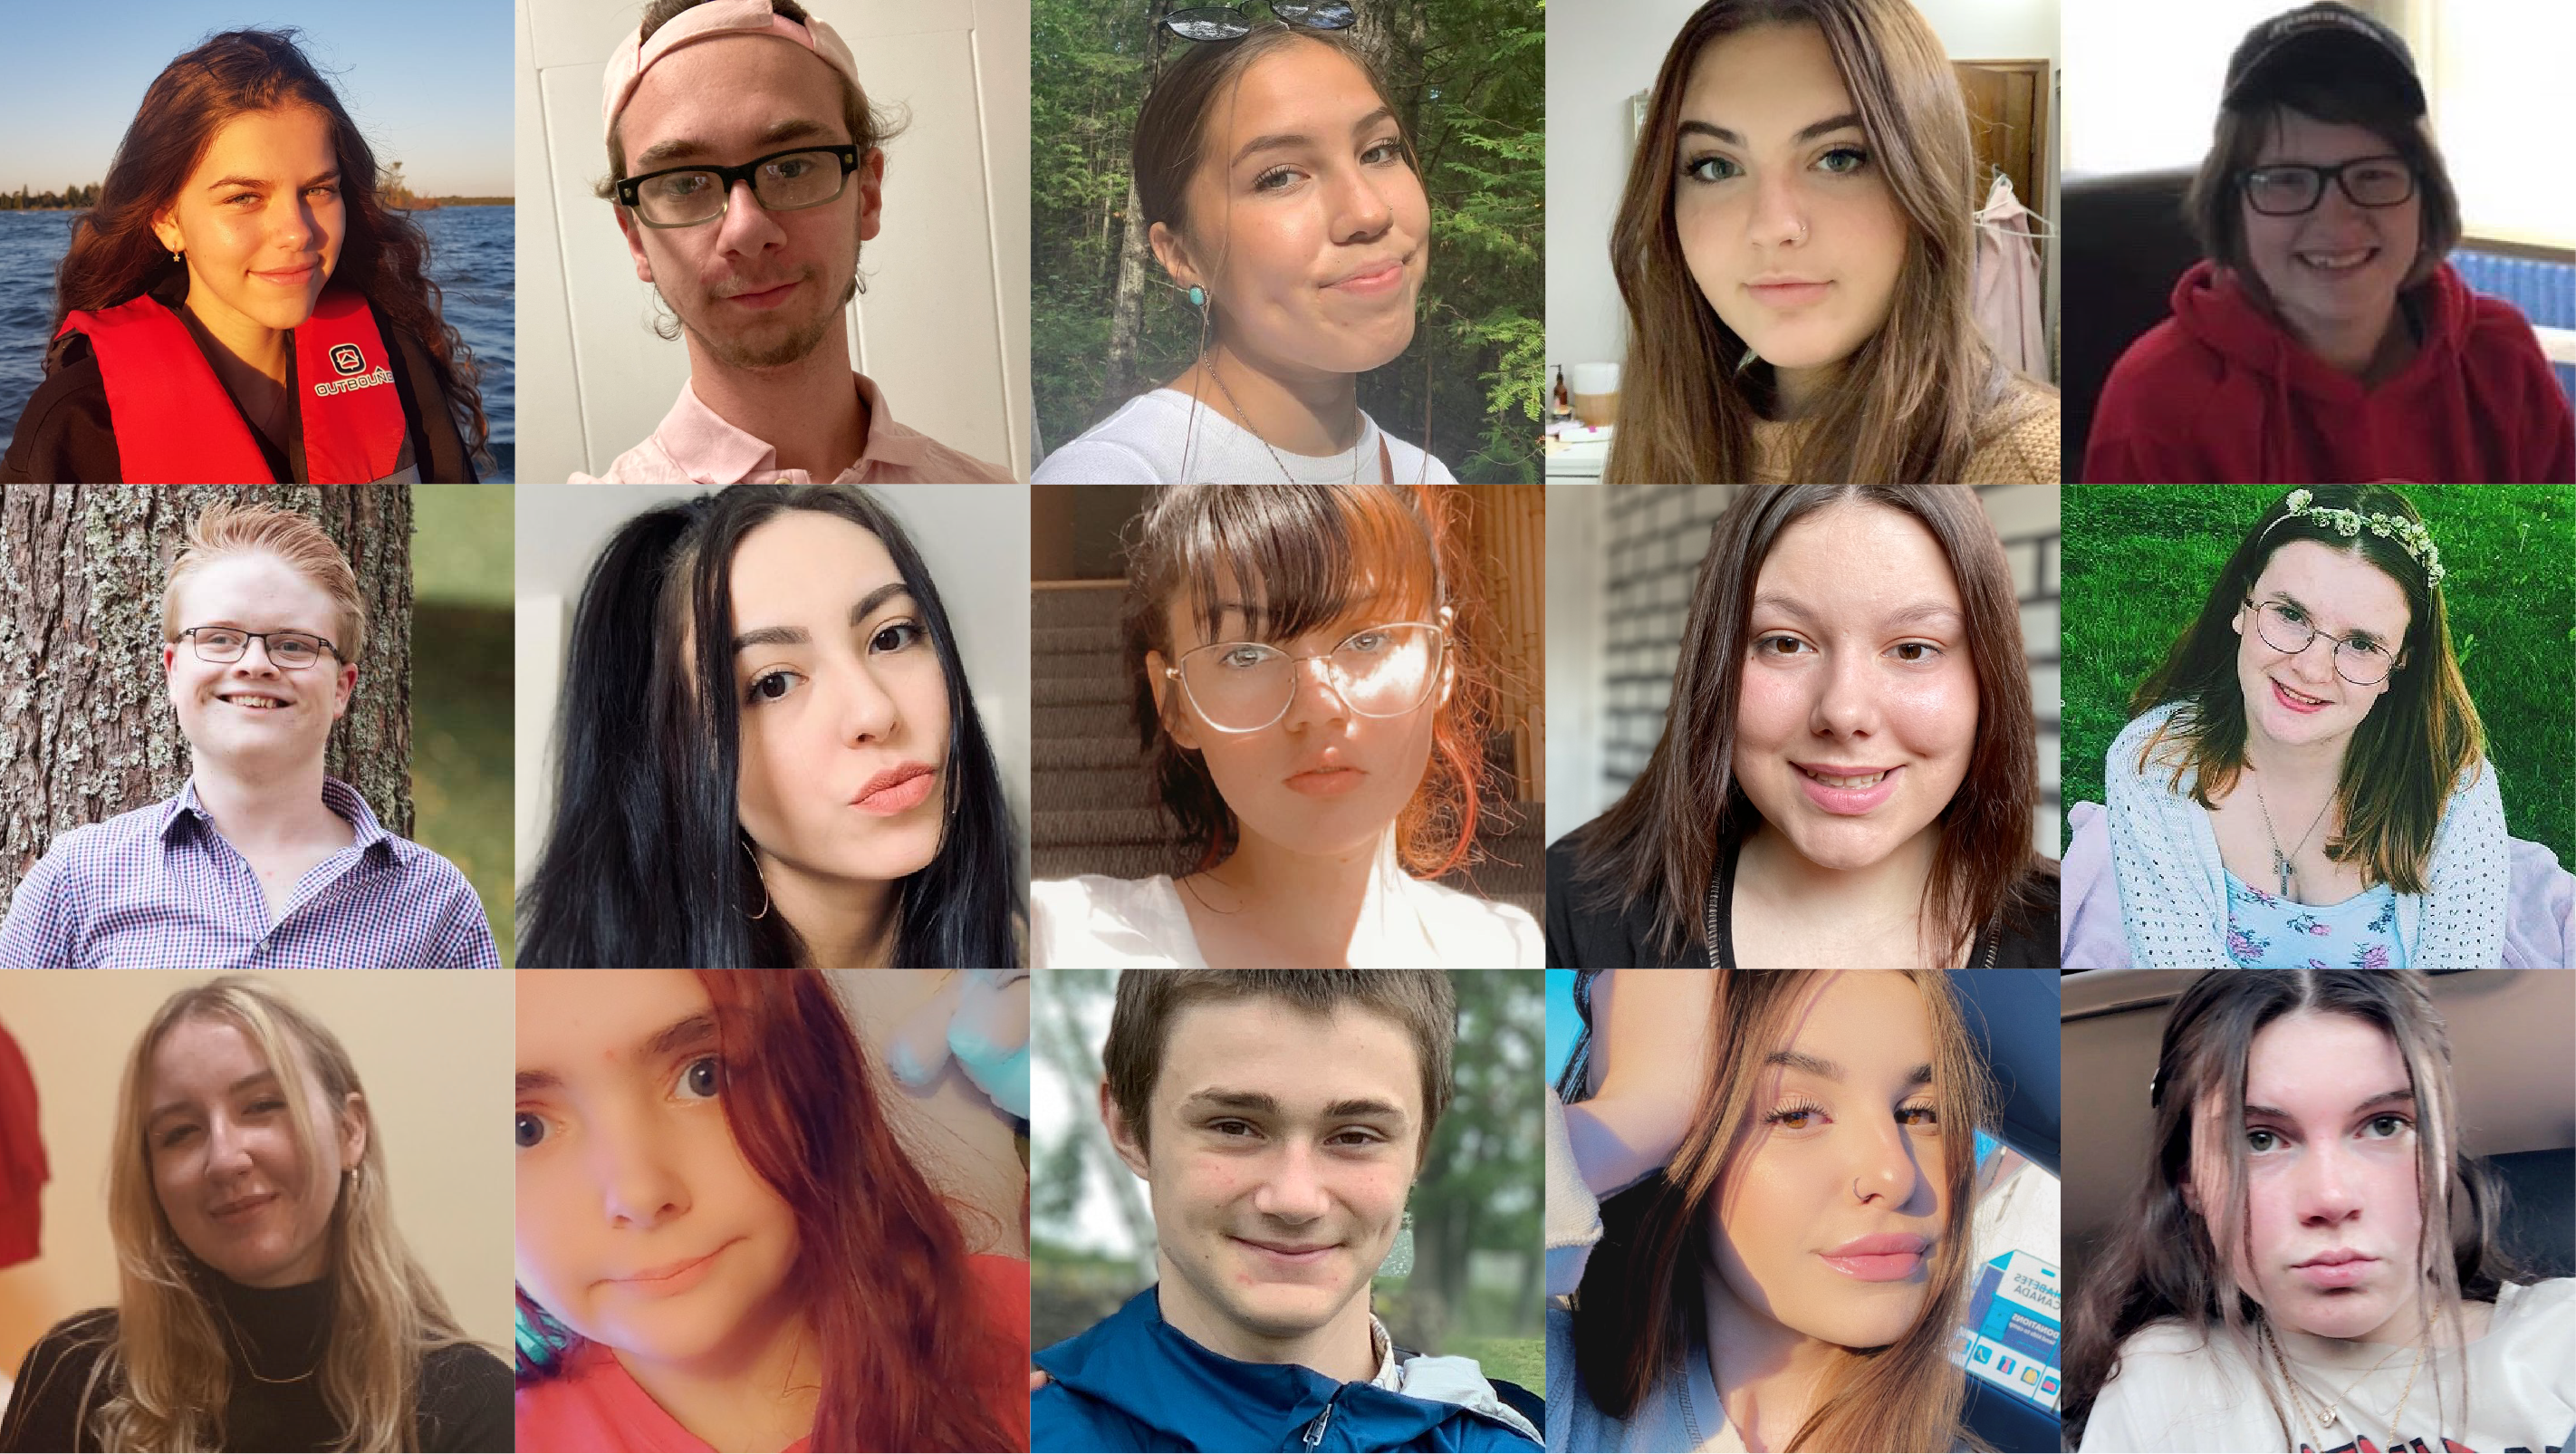 A grid of images showing the 15 youth who participated in the project.